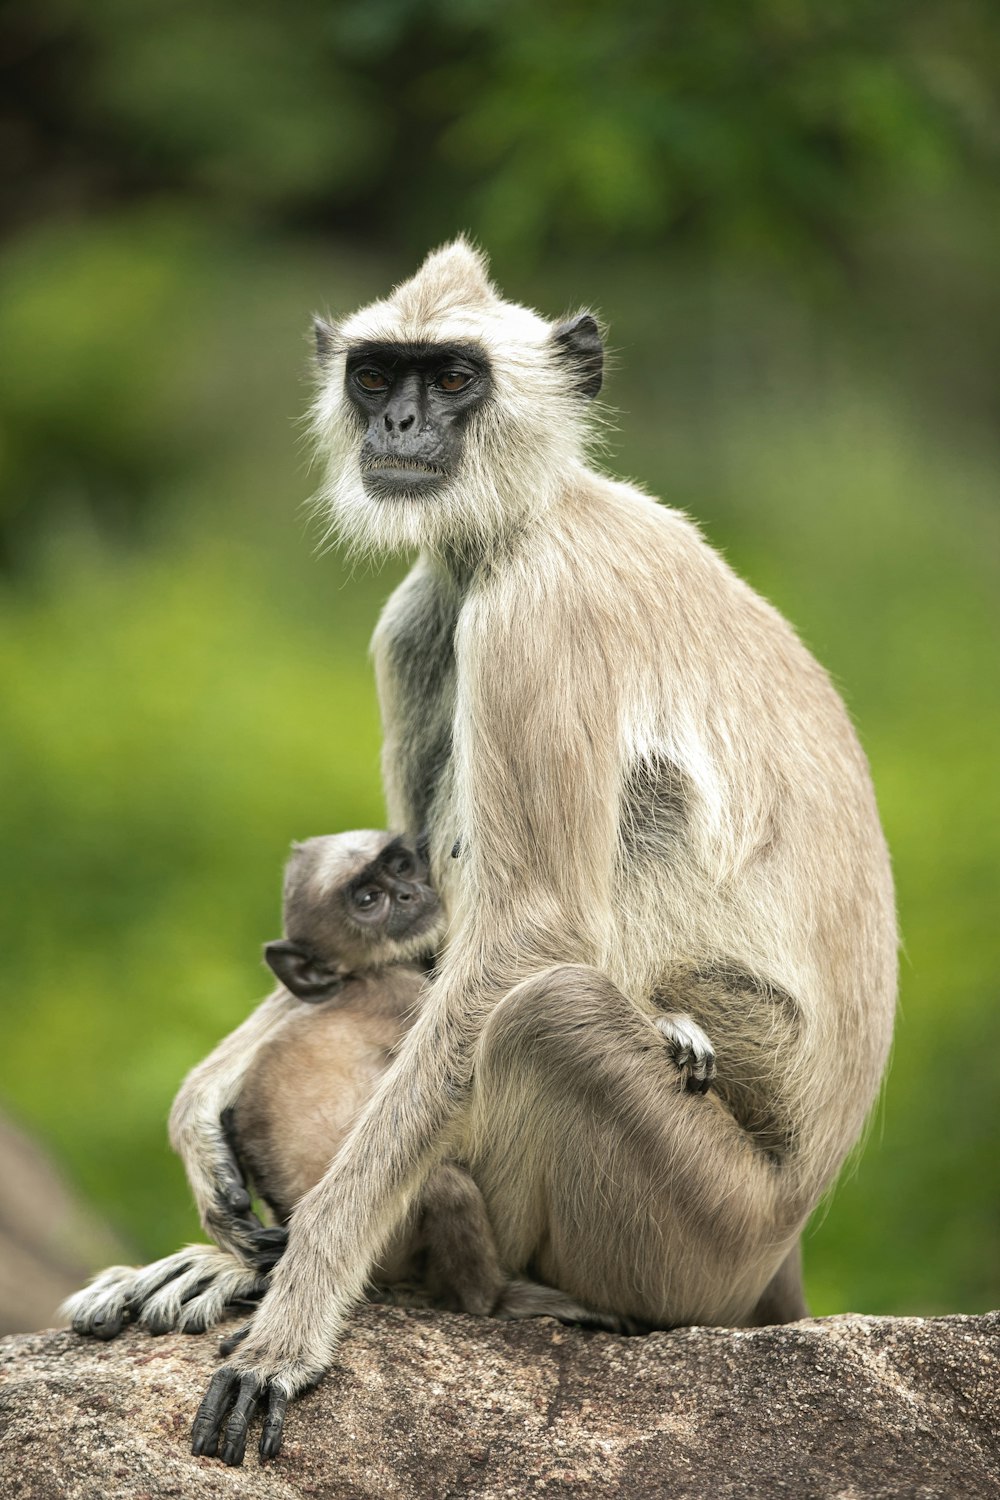 a mother and baby monkey sitting on a rock